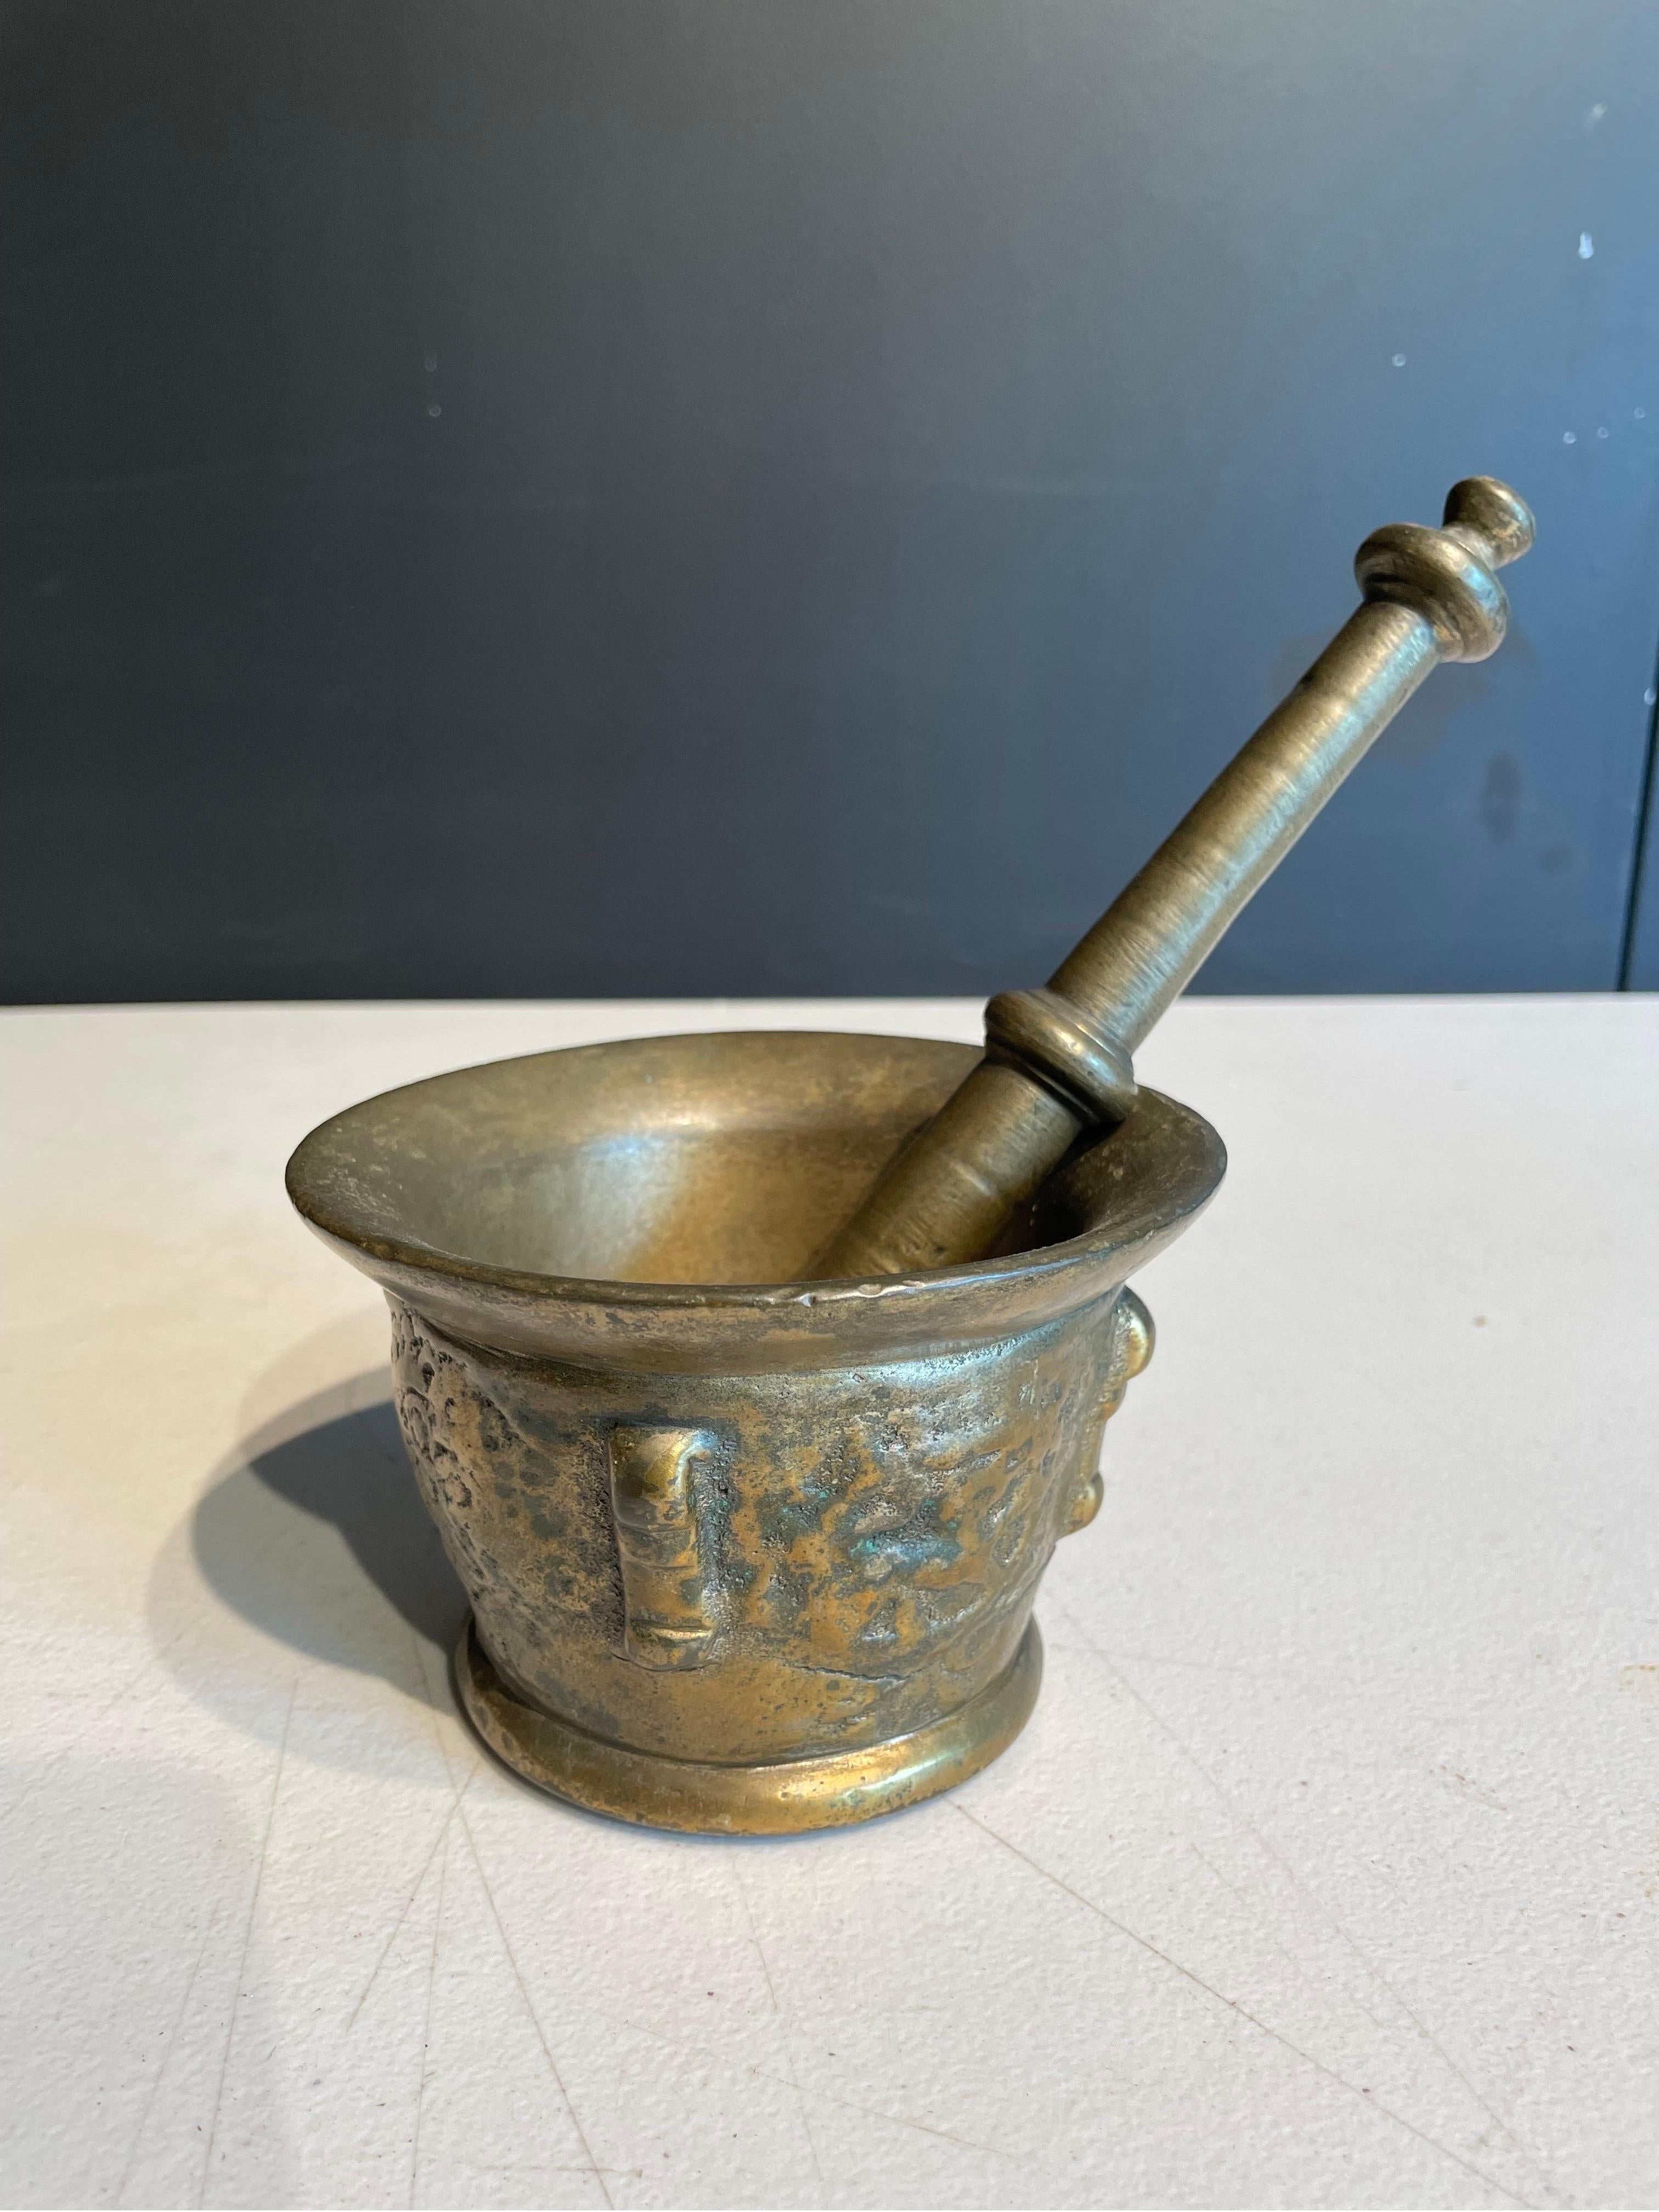 An Antique Brass Mortar with Pestle, 19th Century